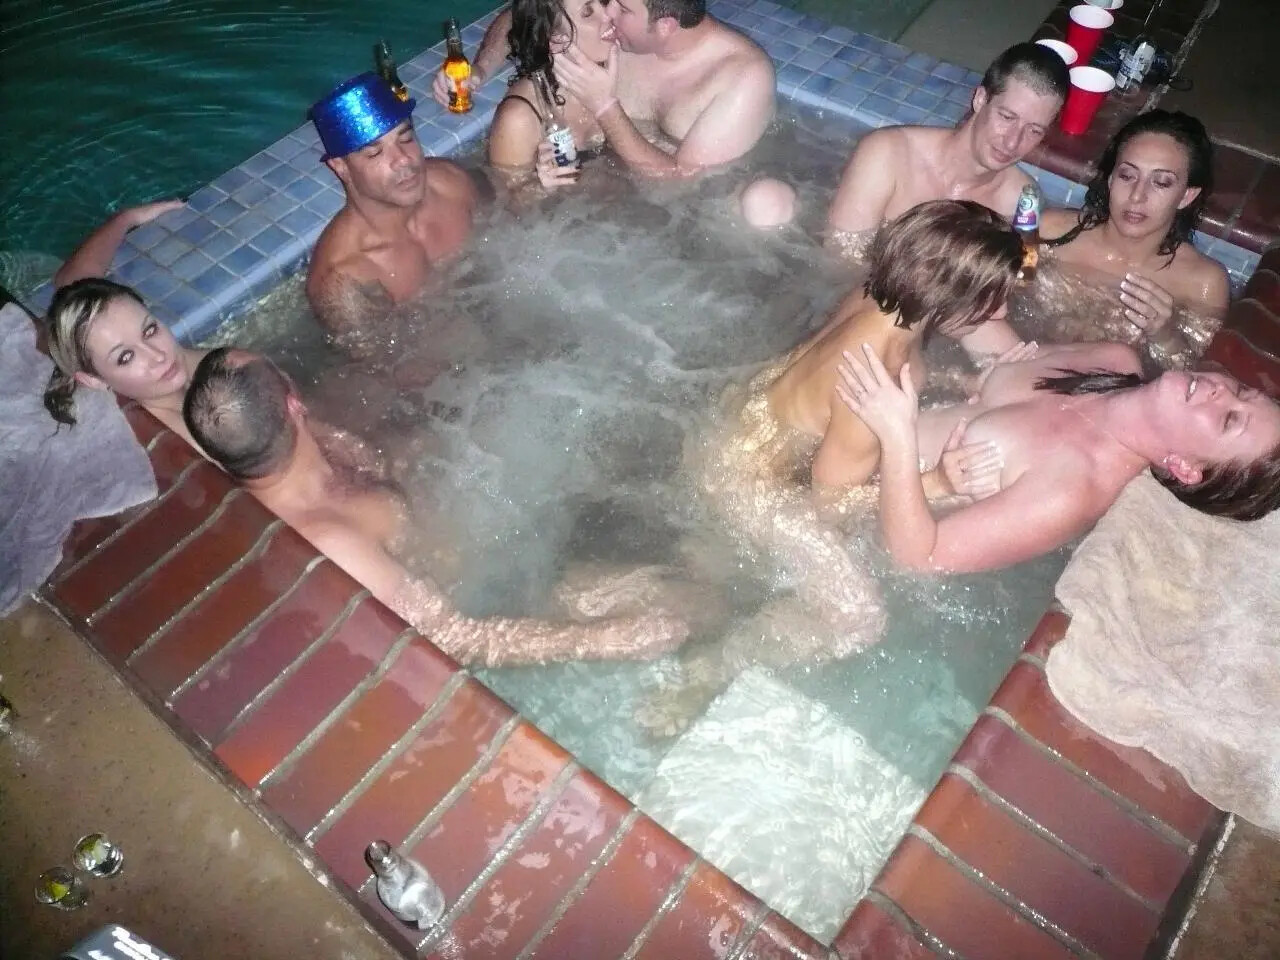 Our sex party? Ive got some pics! - 02-amateur-swinger-pics-from-the-hot-tub Porn